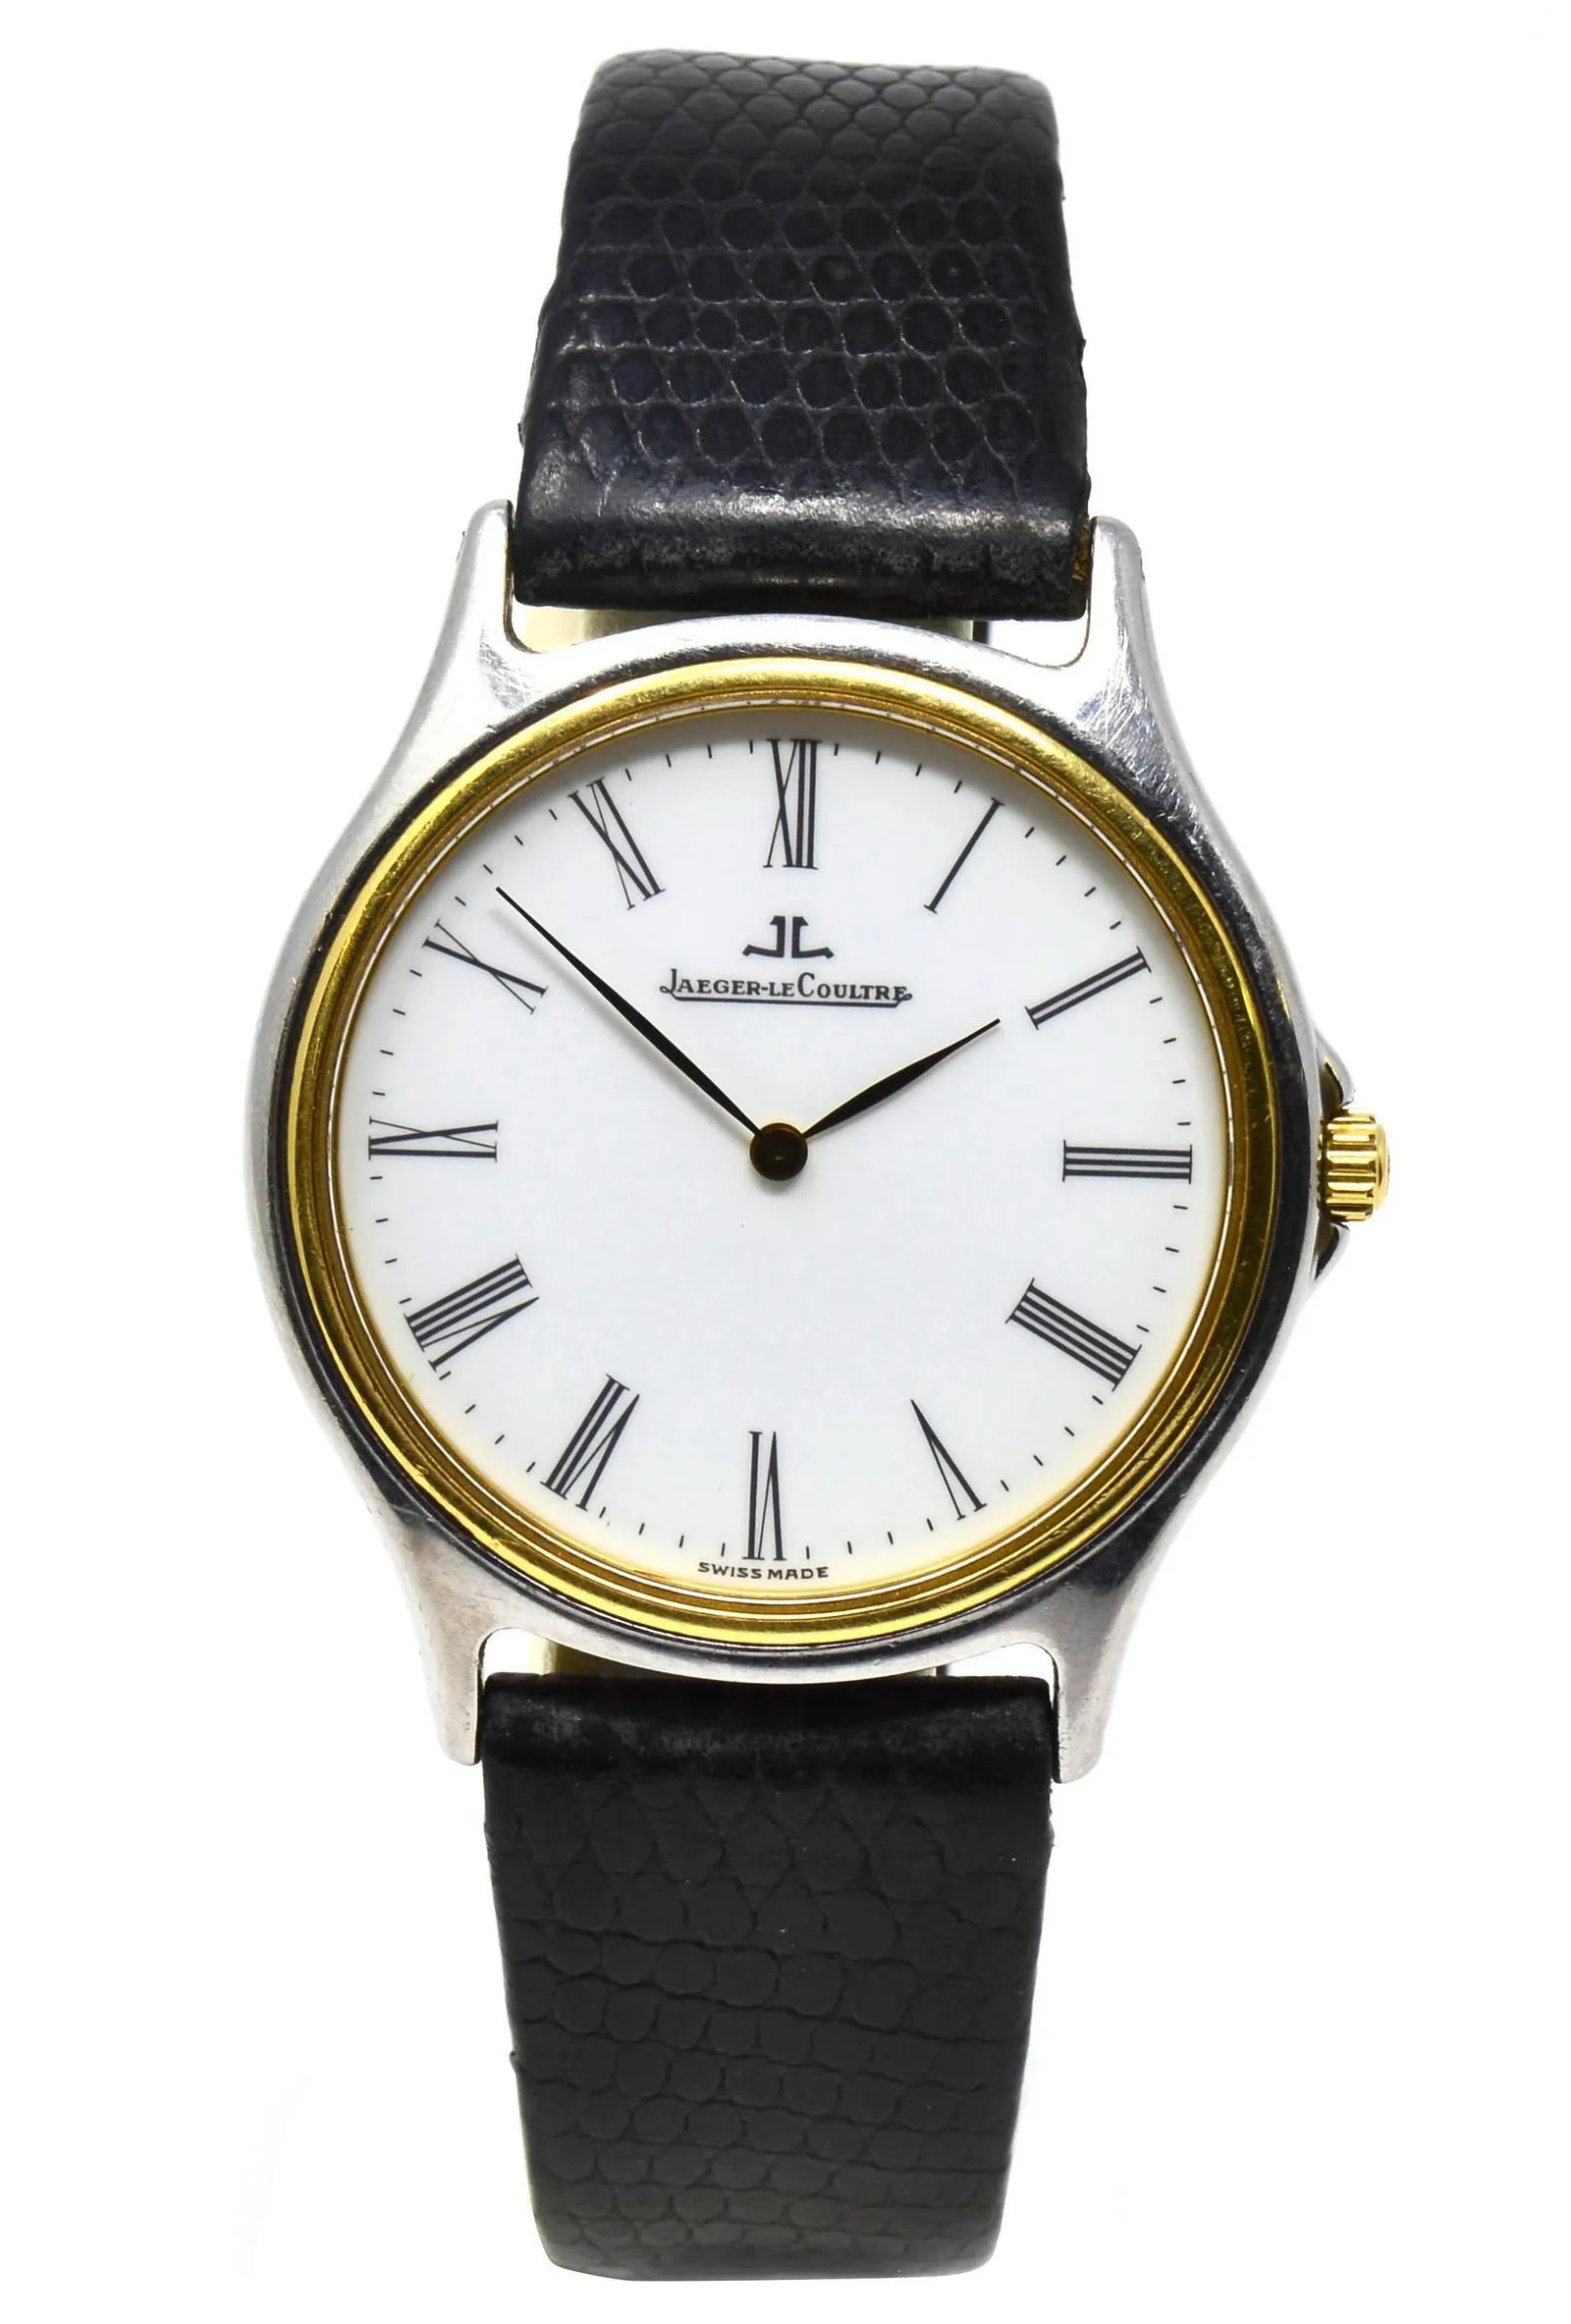 Jaeger-LeCoultre 112.5.08 nullmm Yellow gold and stainless steel White